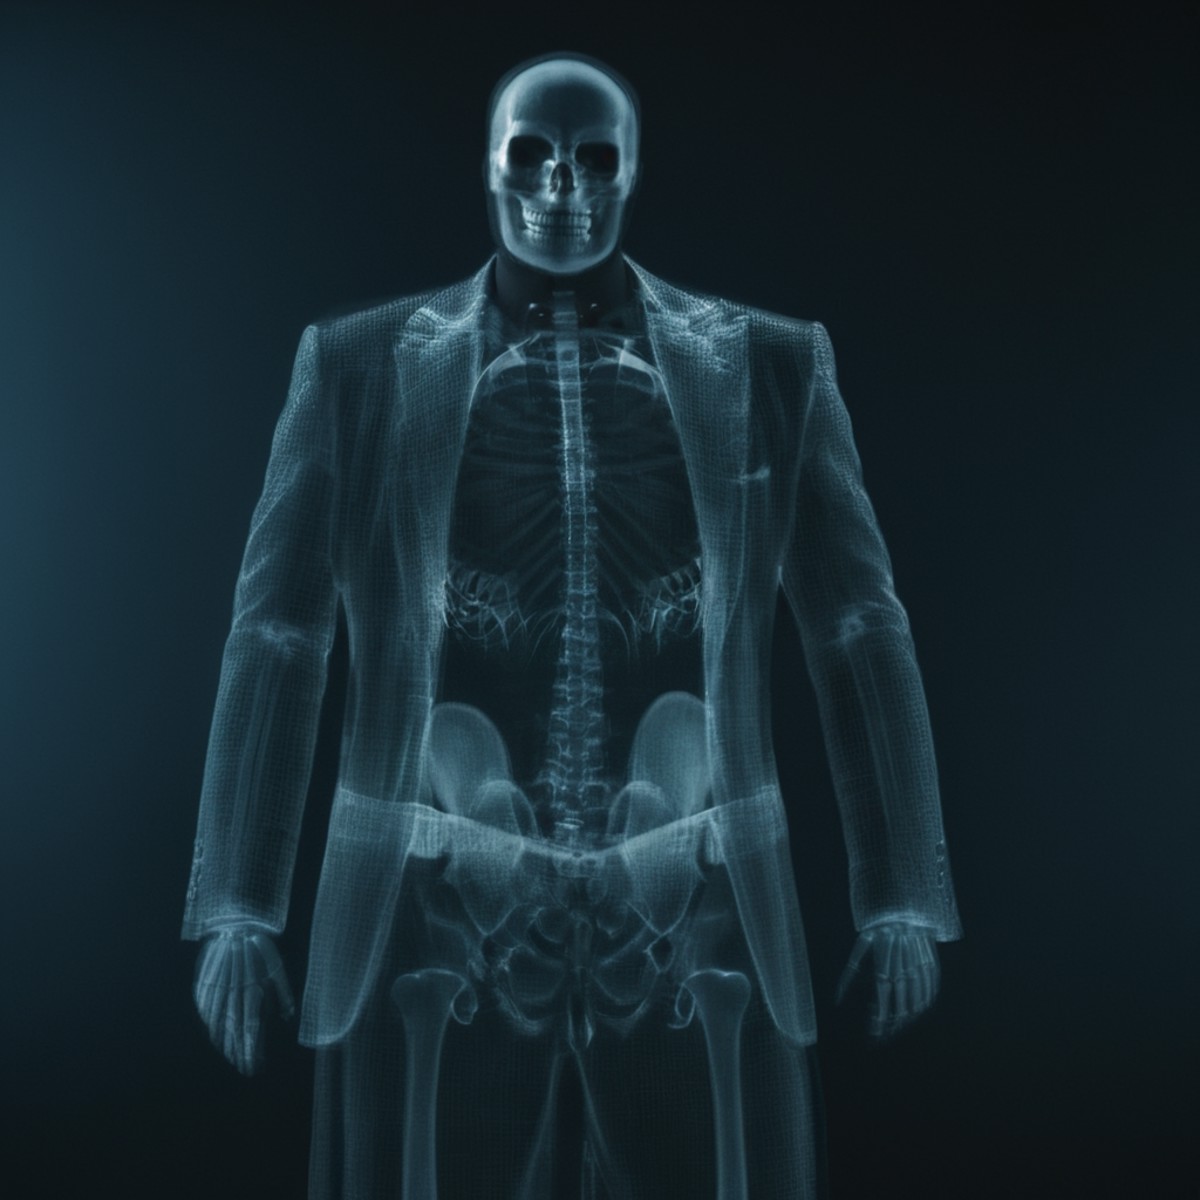 cinematic film still of  <lora:x-ray style:1> X-ray of
a skeleton with batman suit on
,x-ray style, shallow depth of field...